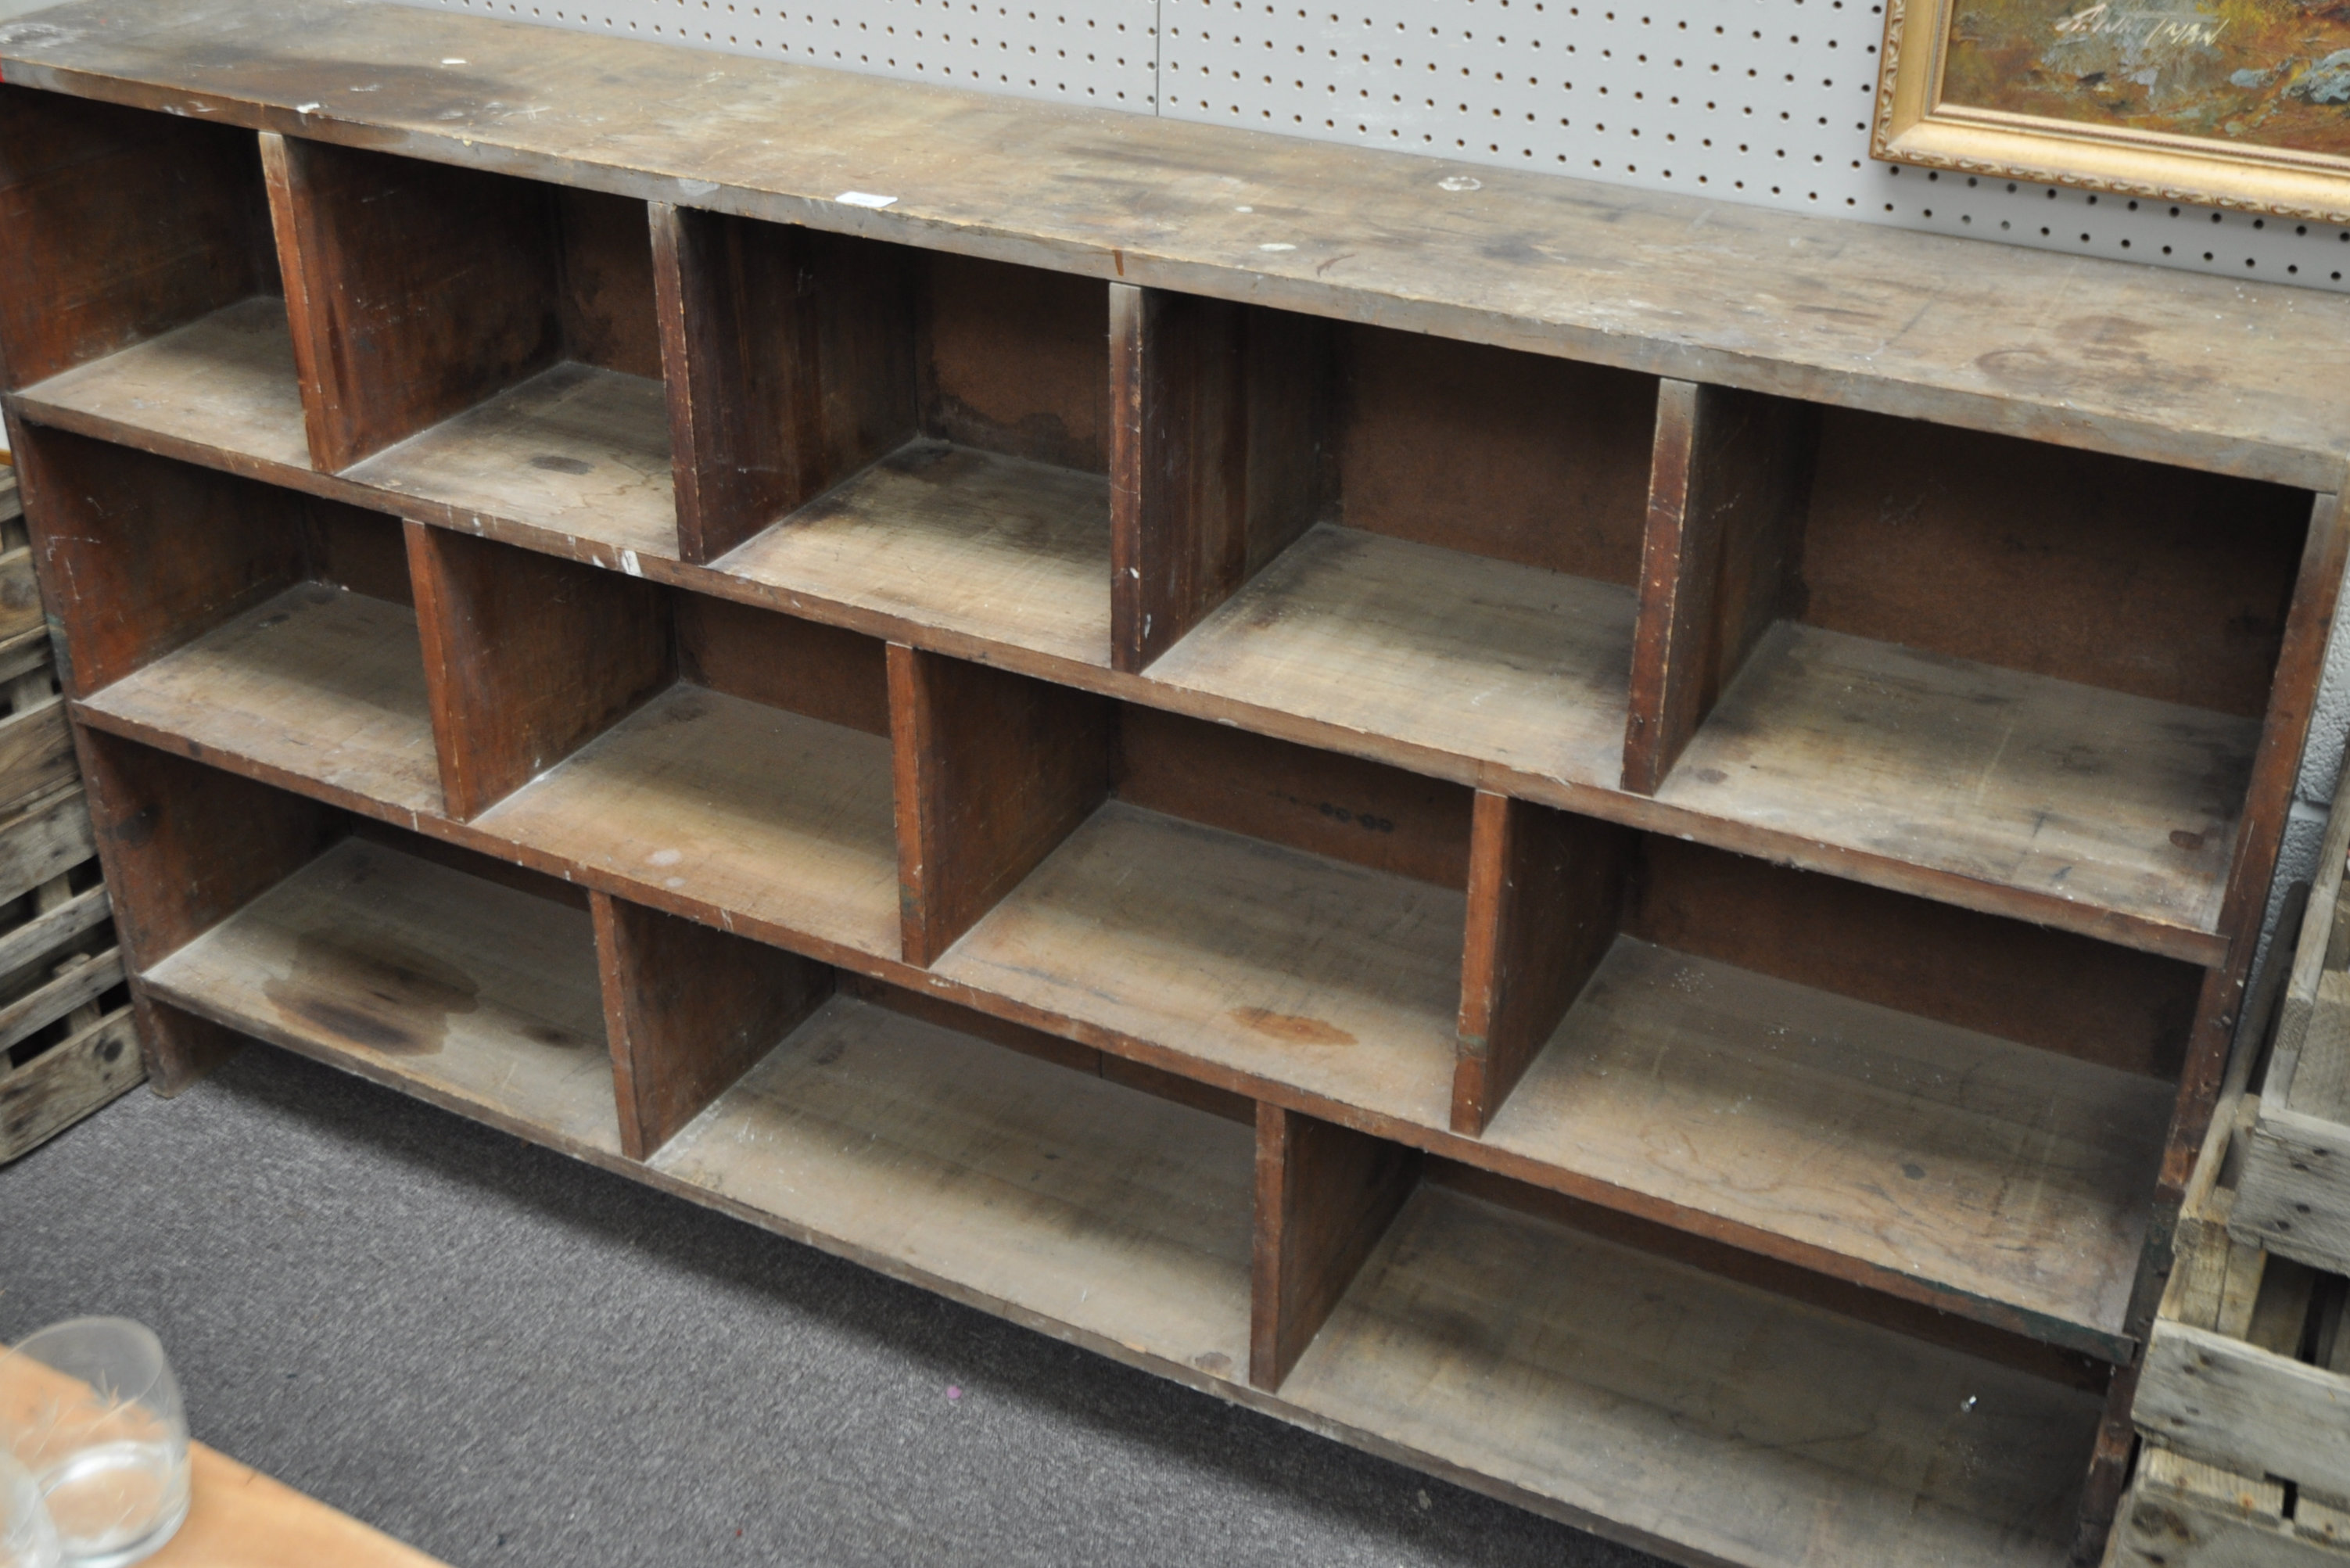 An industrial style bookcase